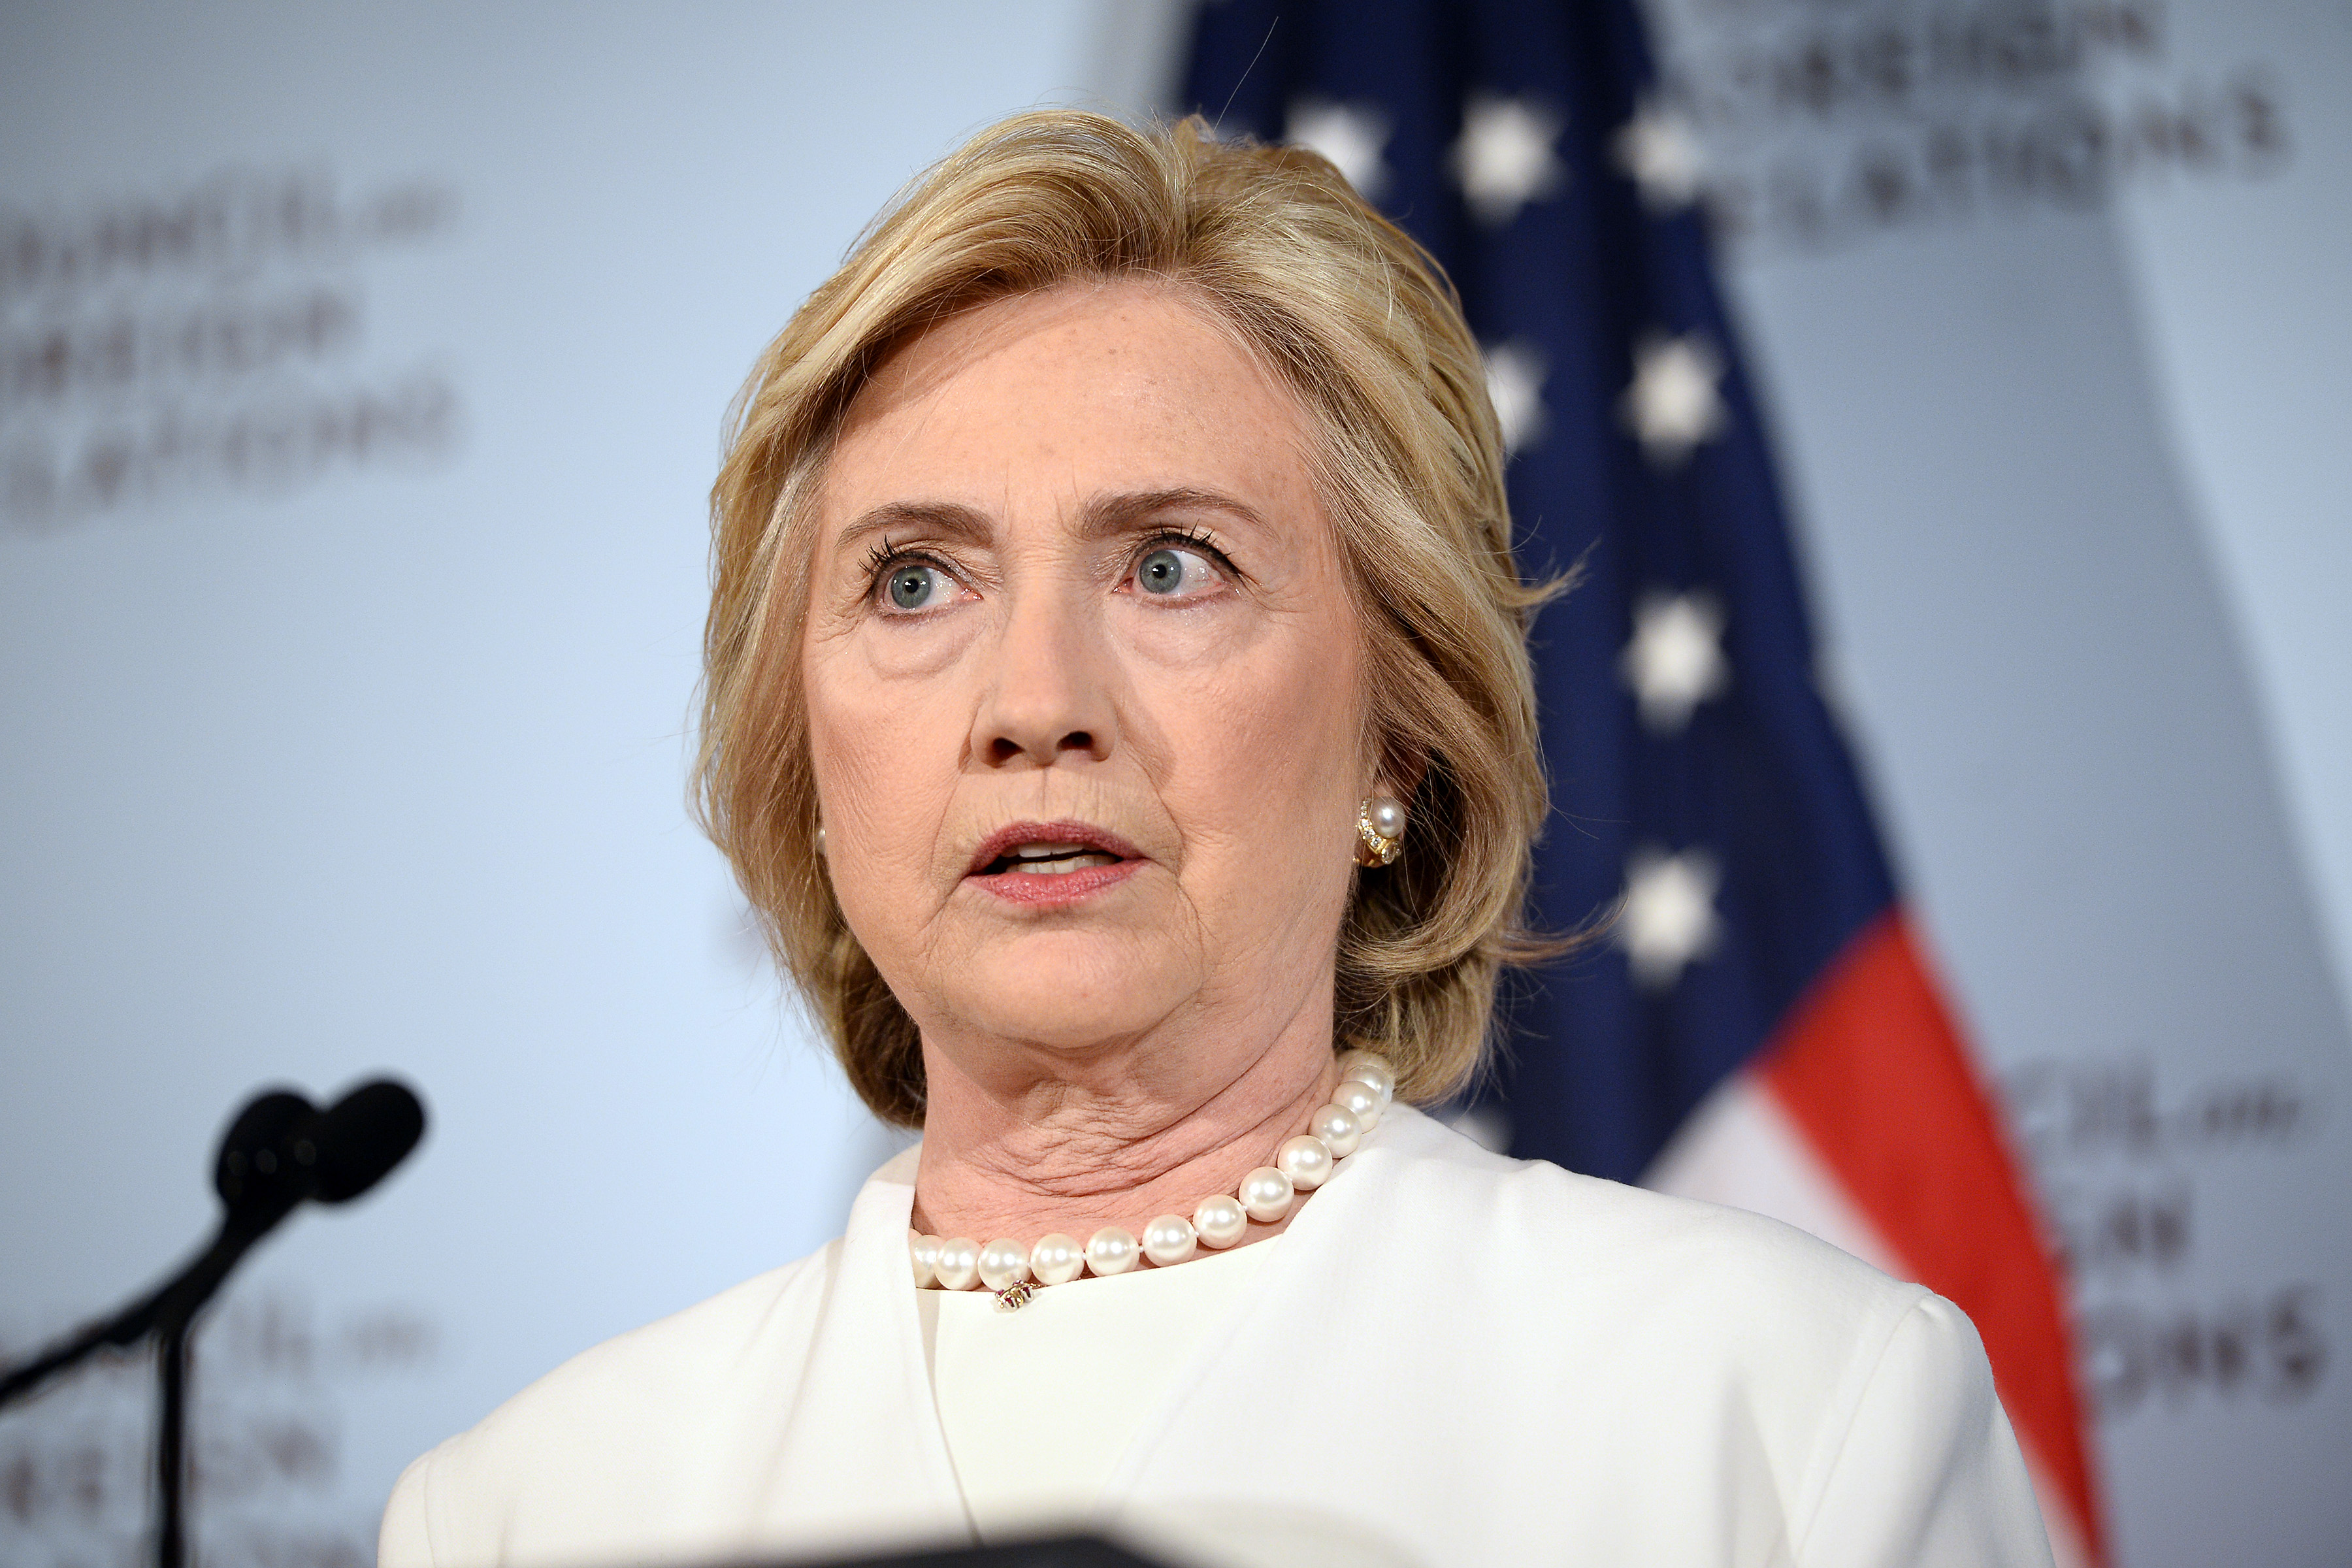 Hillary Clinton holds a press conference on National Security at the Council on Foreign Relations in New York on Nov. 19, 2015. (Behar Anthony—Anthony Behar/Sipa USA)